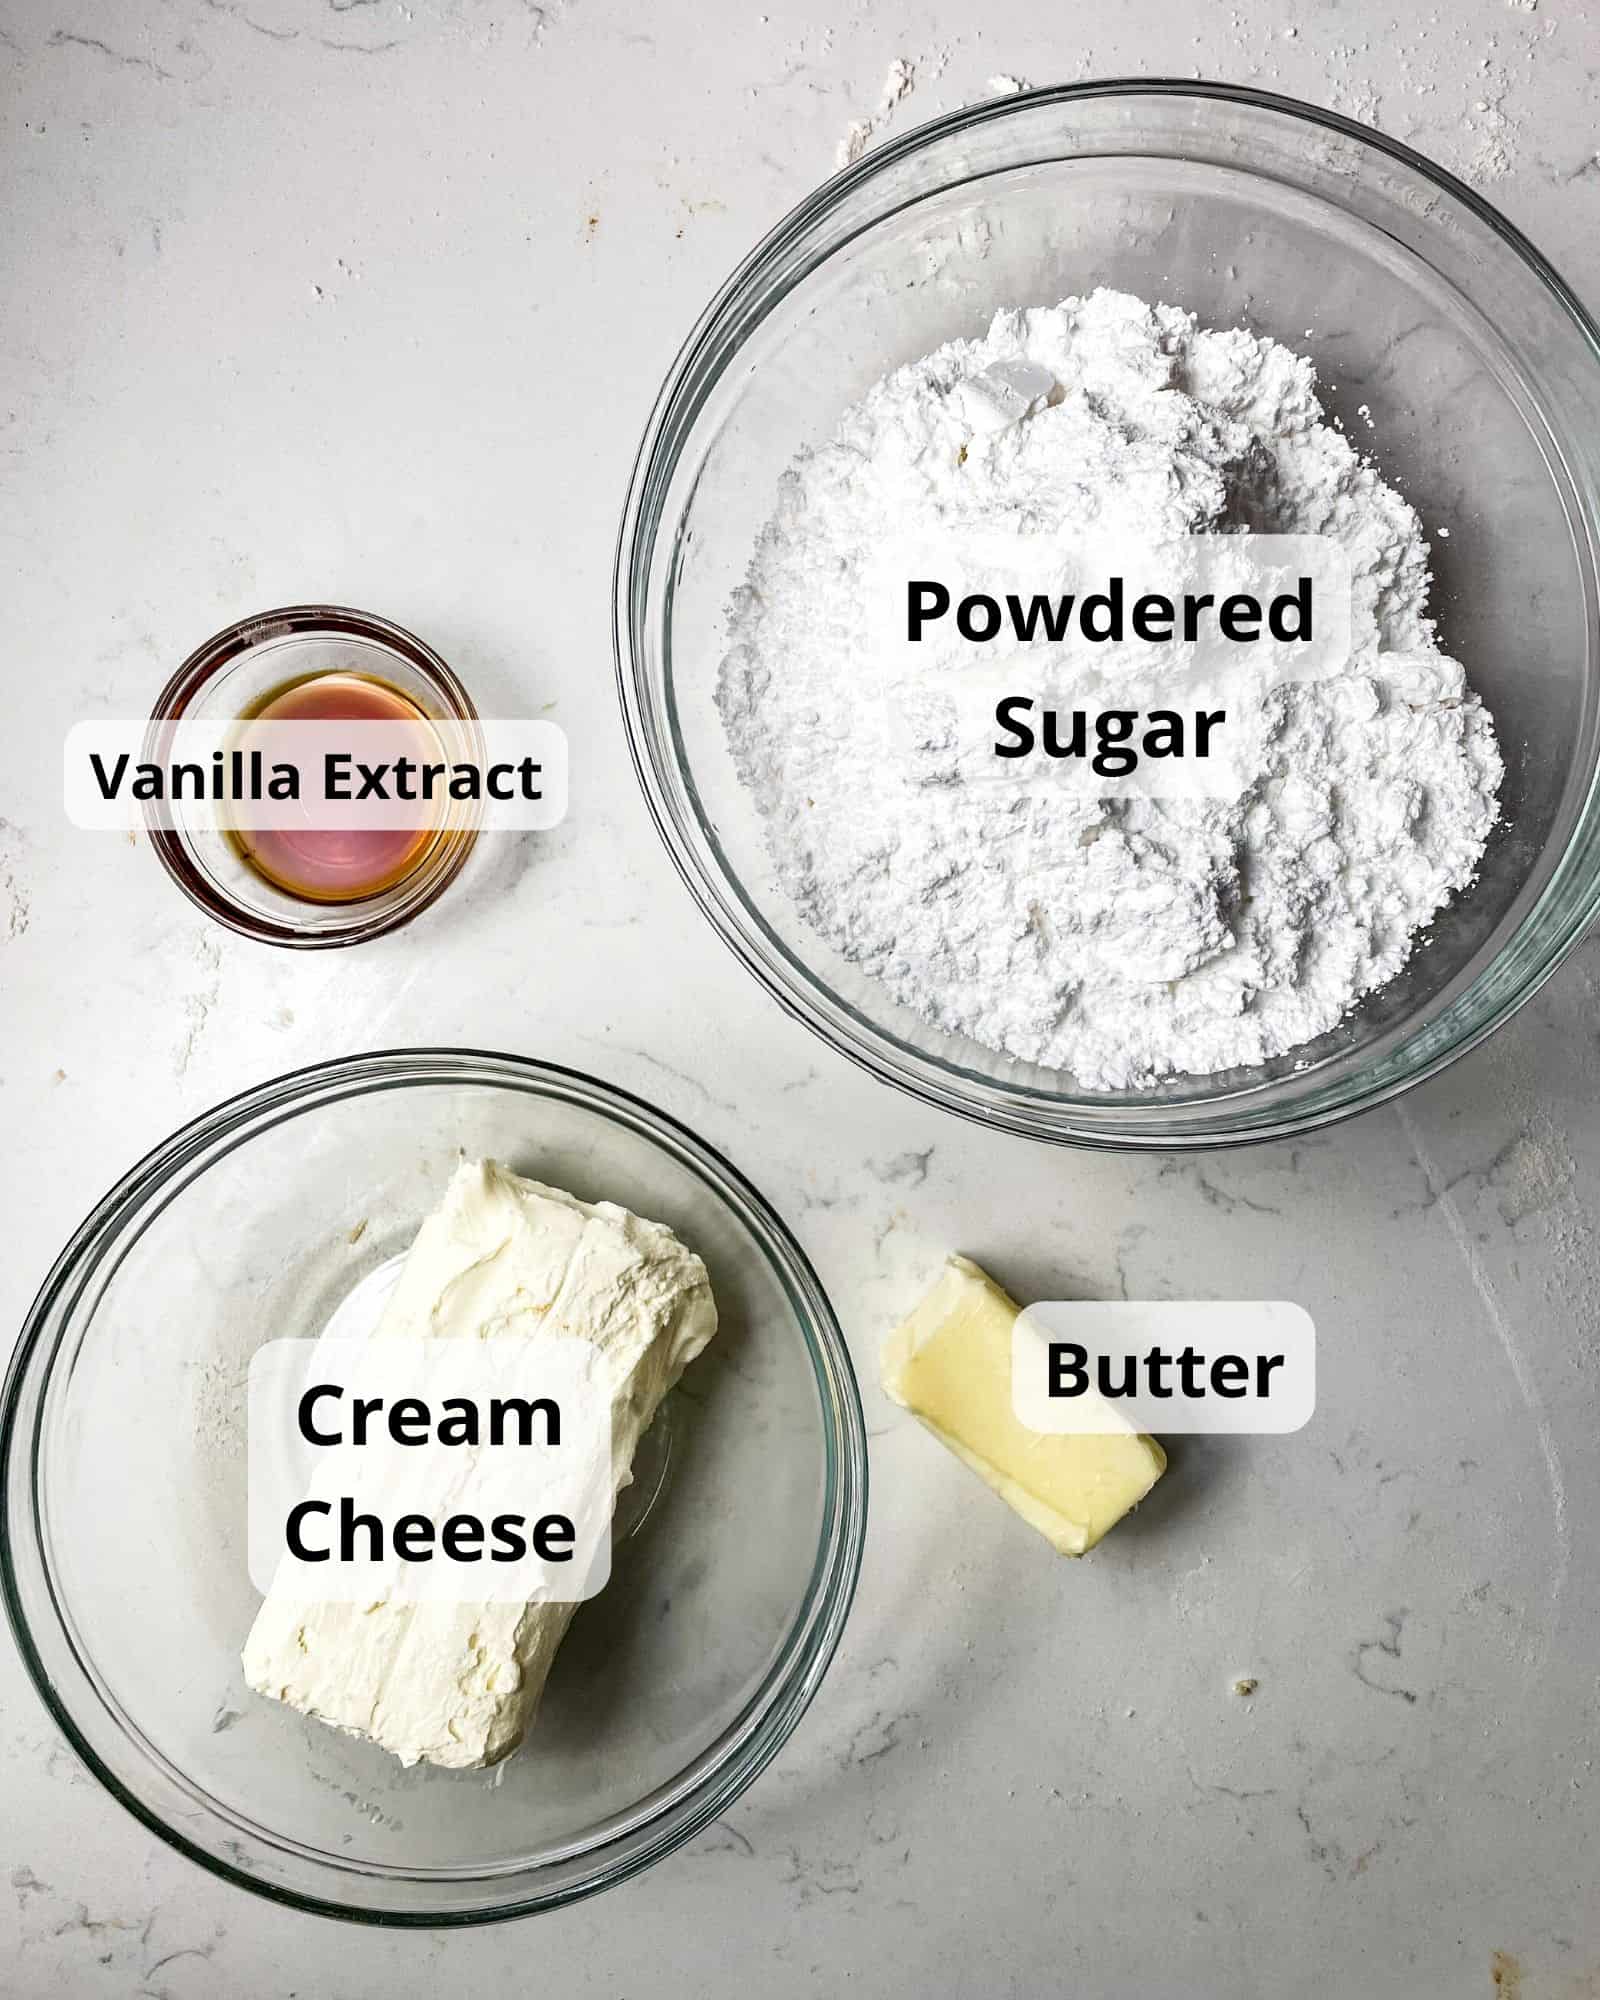 ingredients to make cream cheese icing - cream cheese, butter, powdered sugar, and vanilla extract.